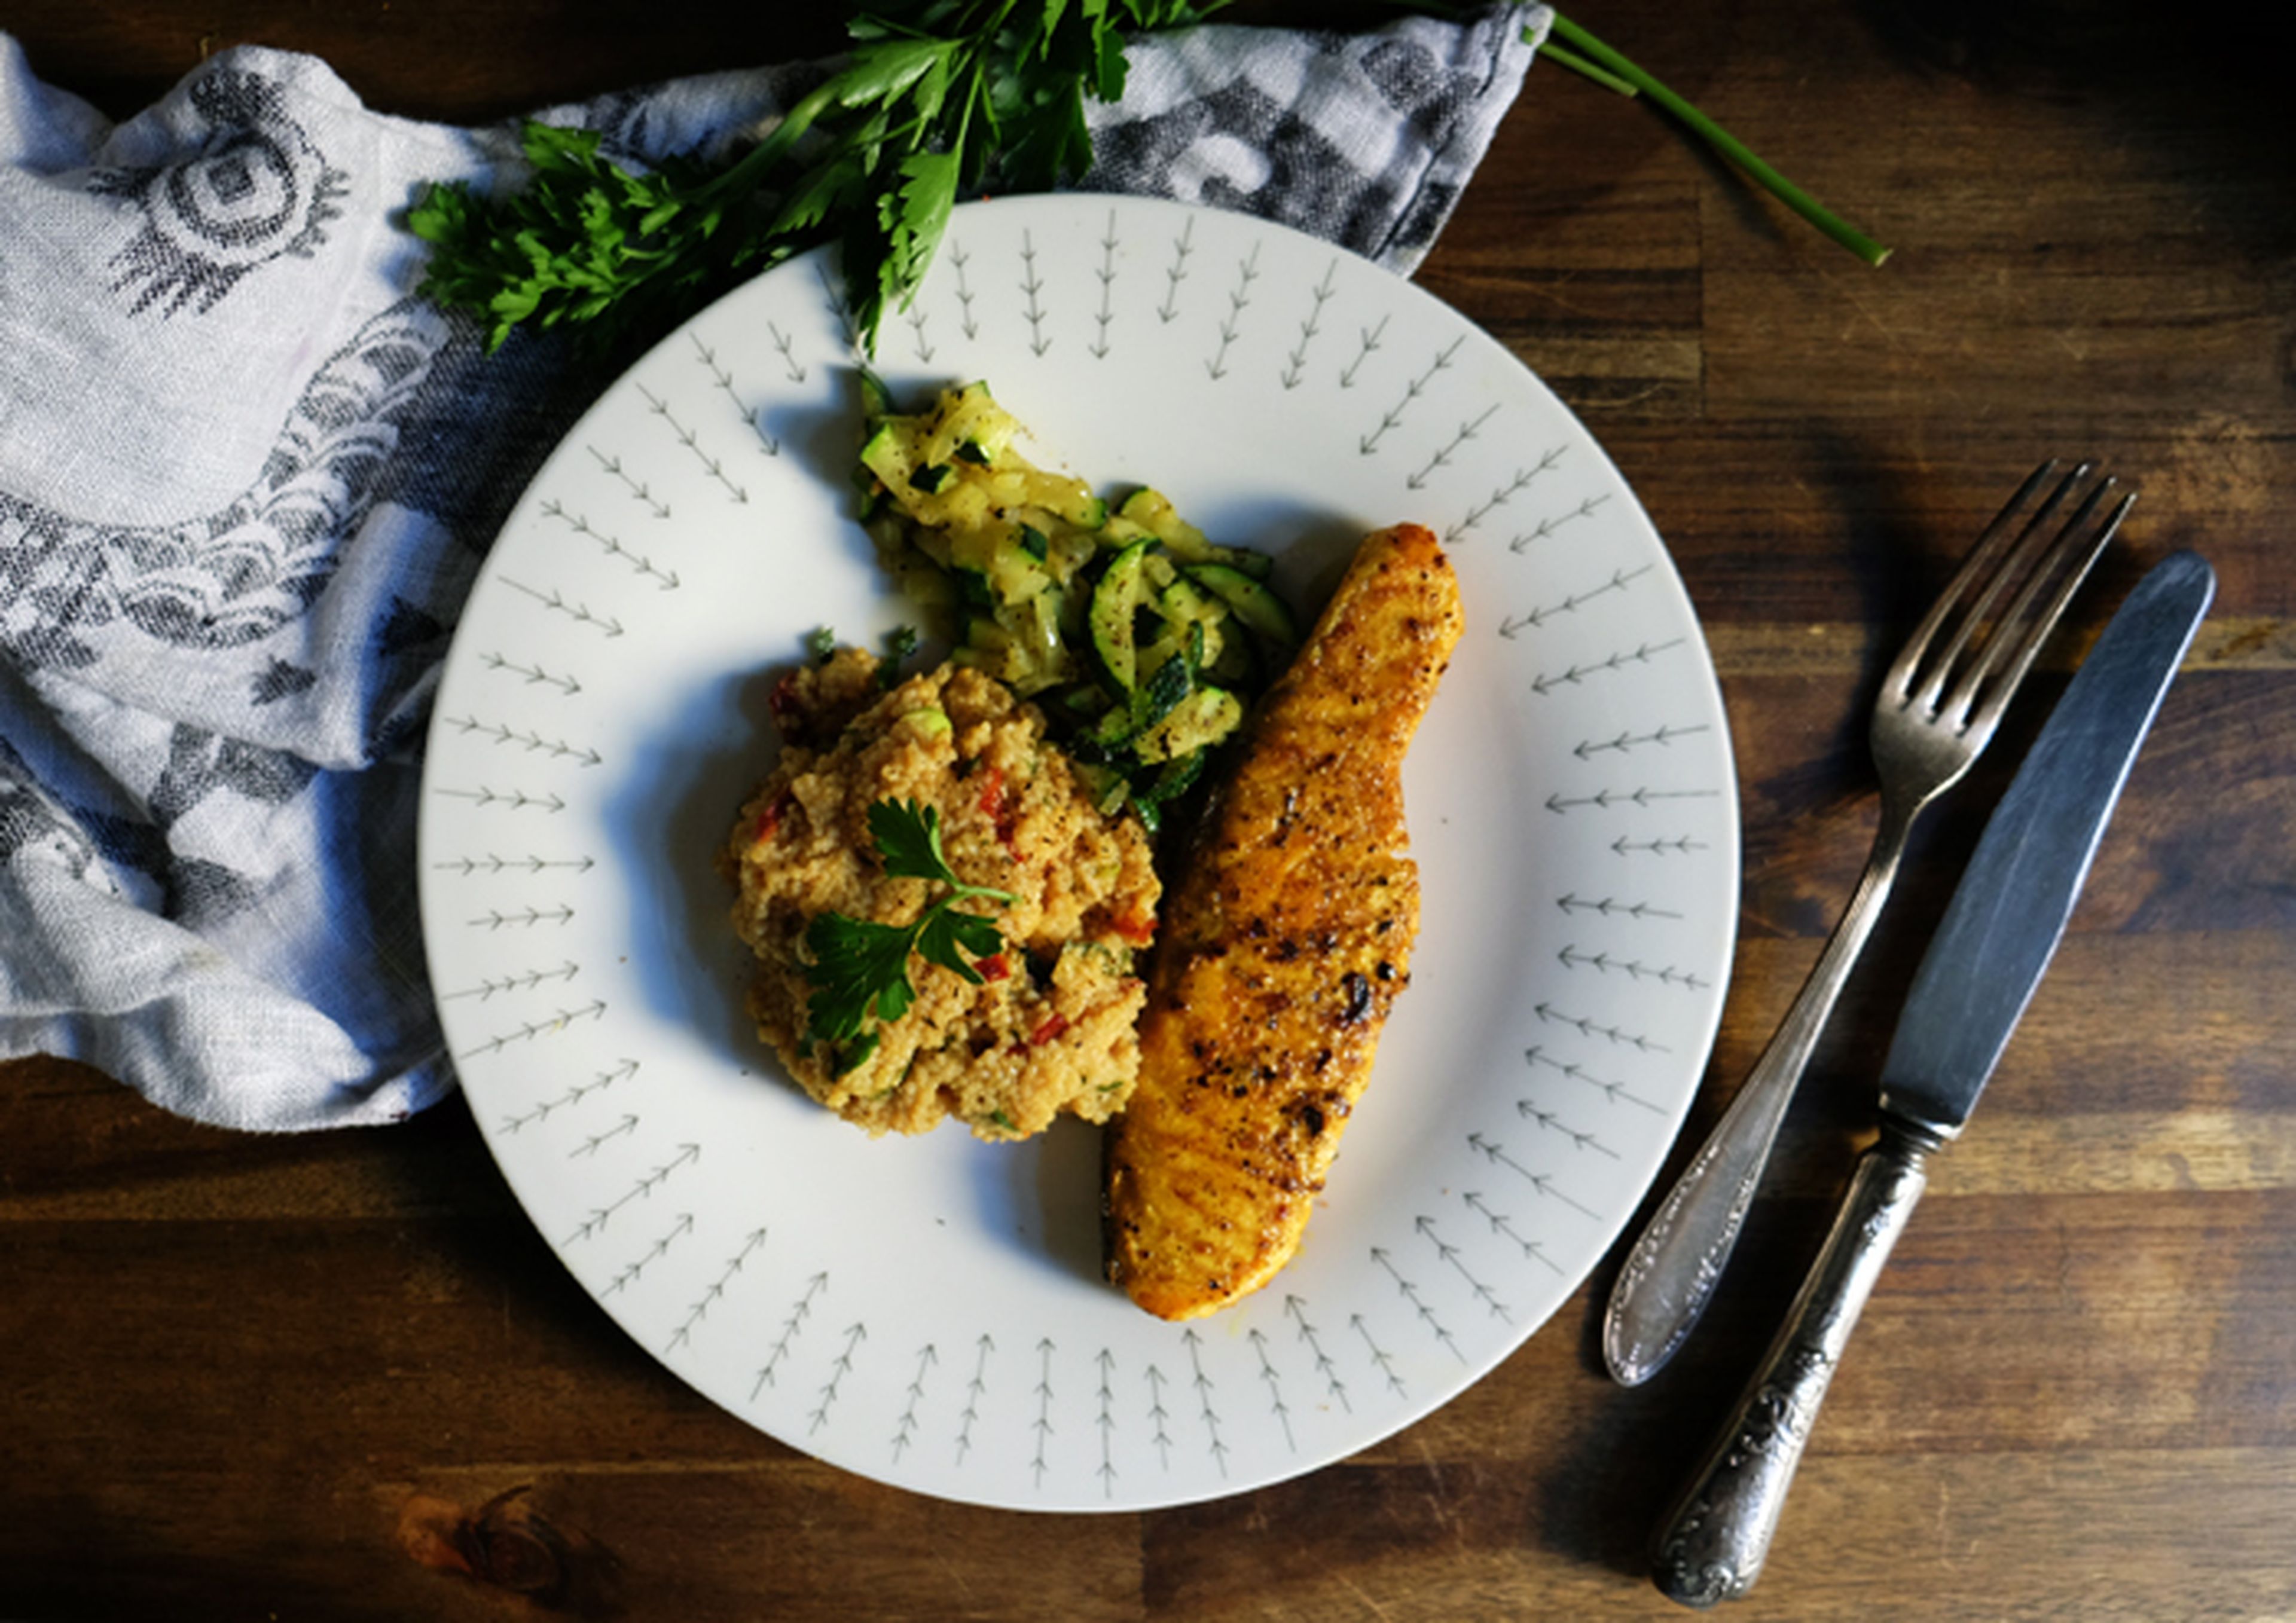 Salmon with couscous and zucchini